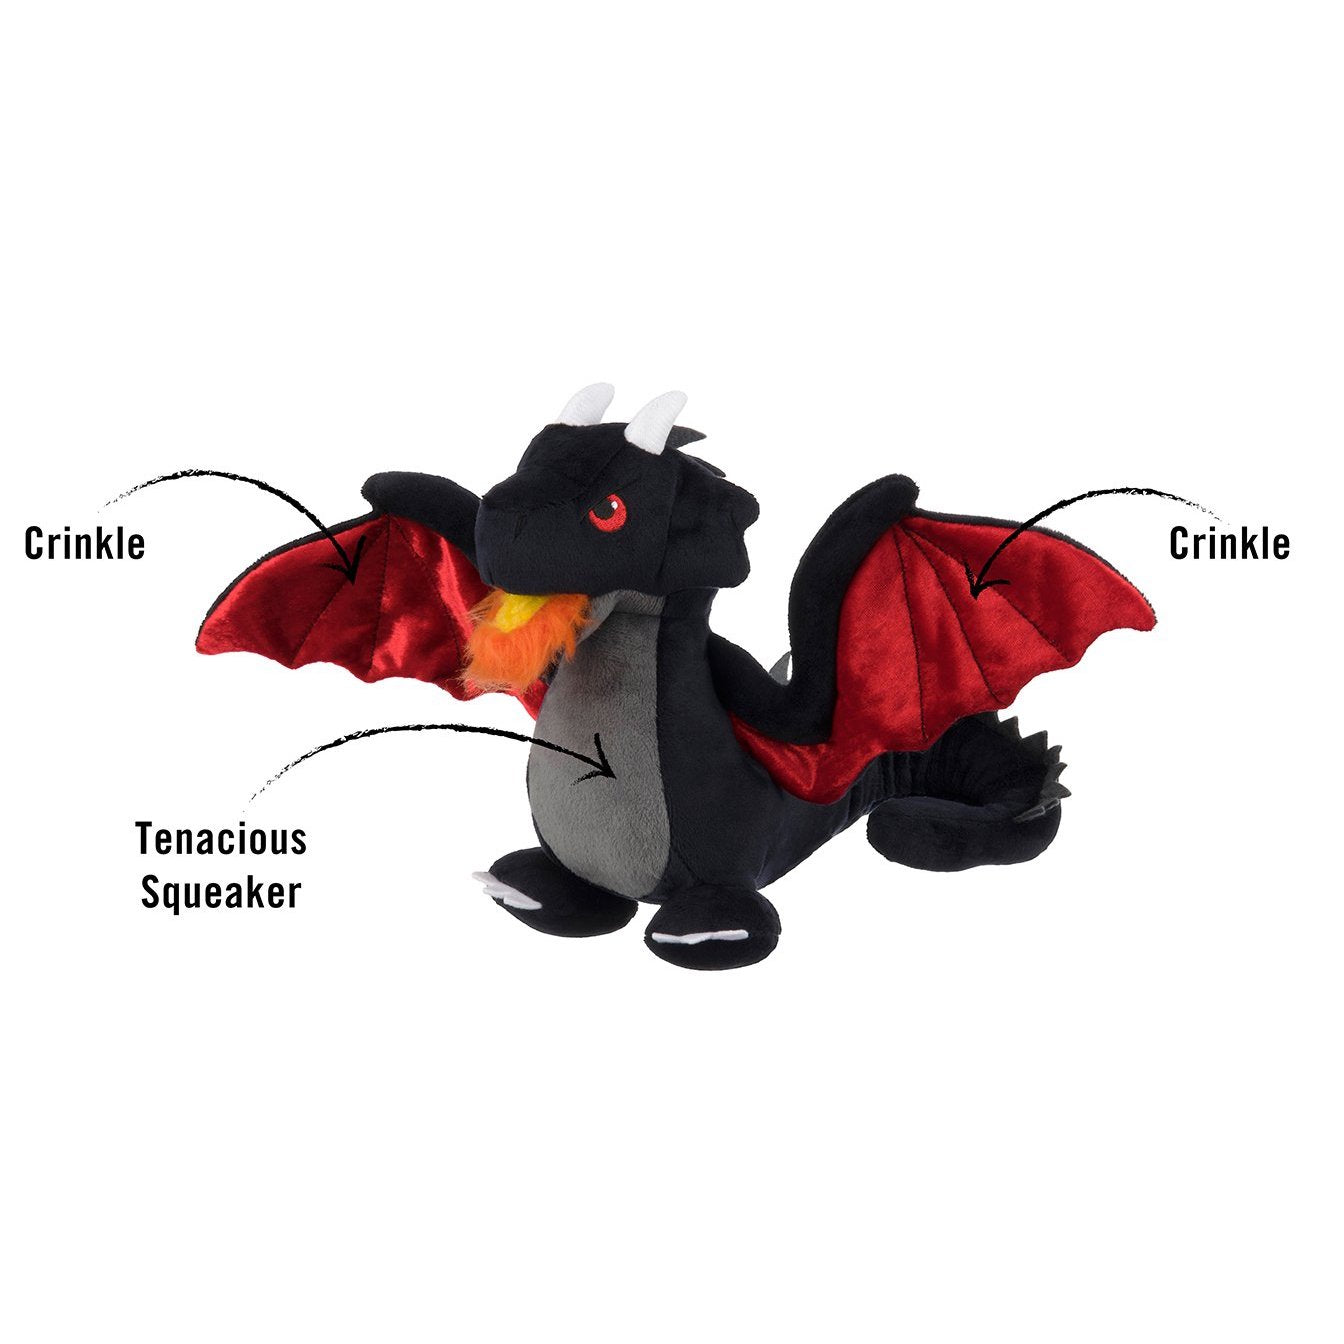 PLAY - Willow's Mythical Creatures Darby the Dragon Plush Toy